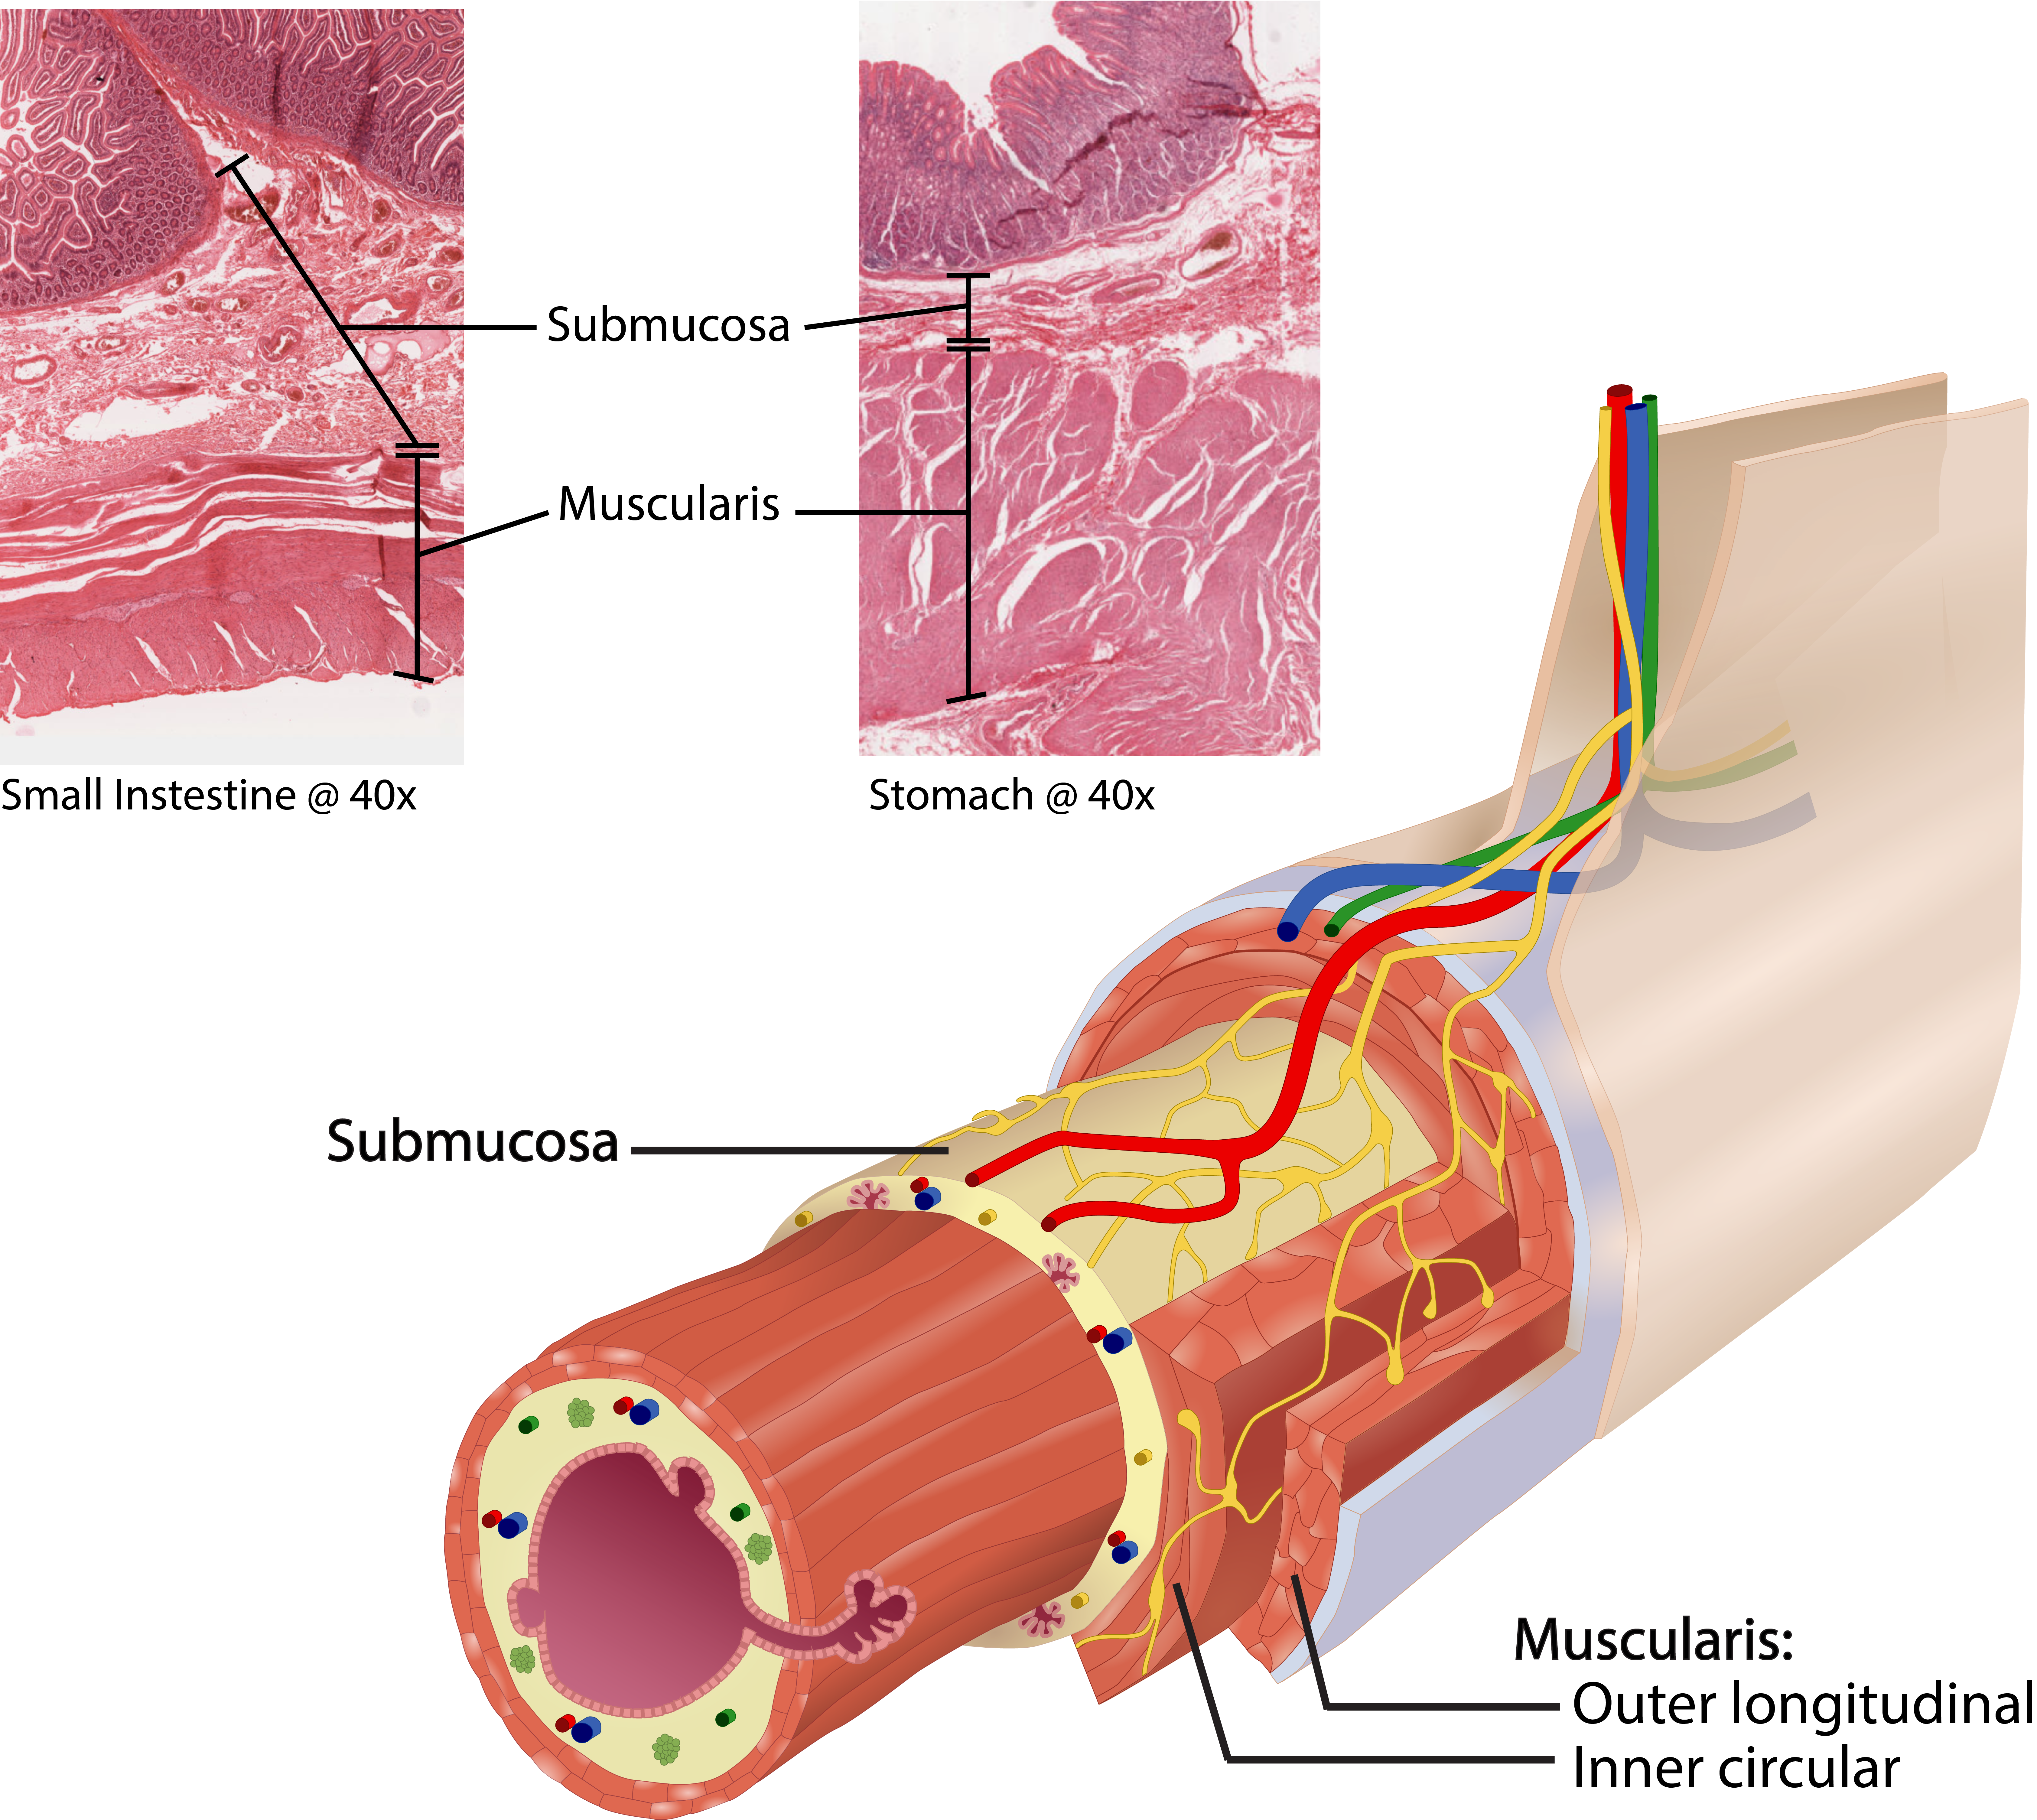 Layers of the GI Tract - Submucosa and Muscularis.png